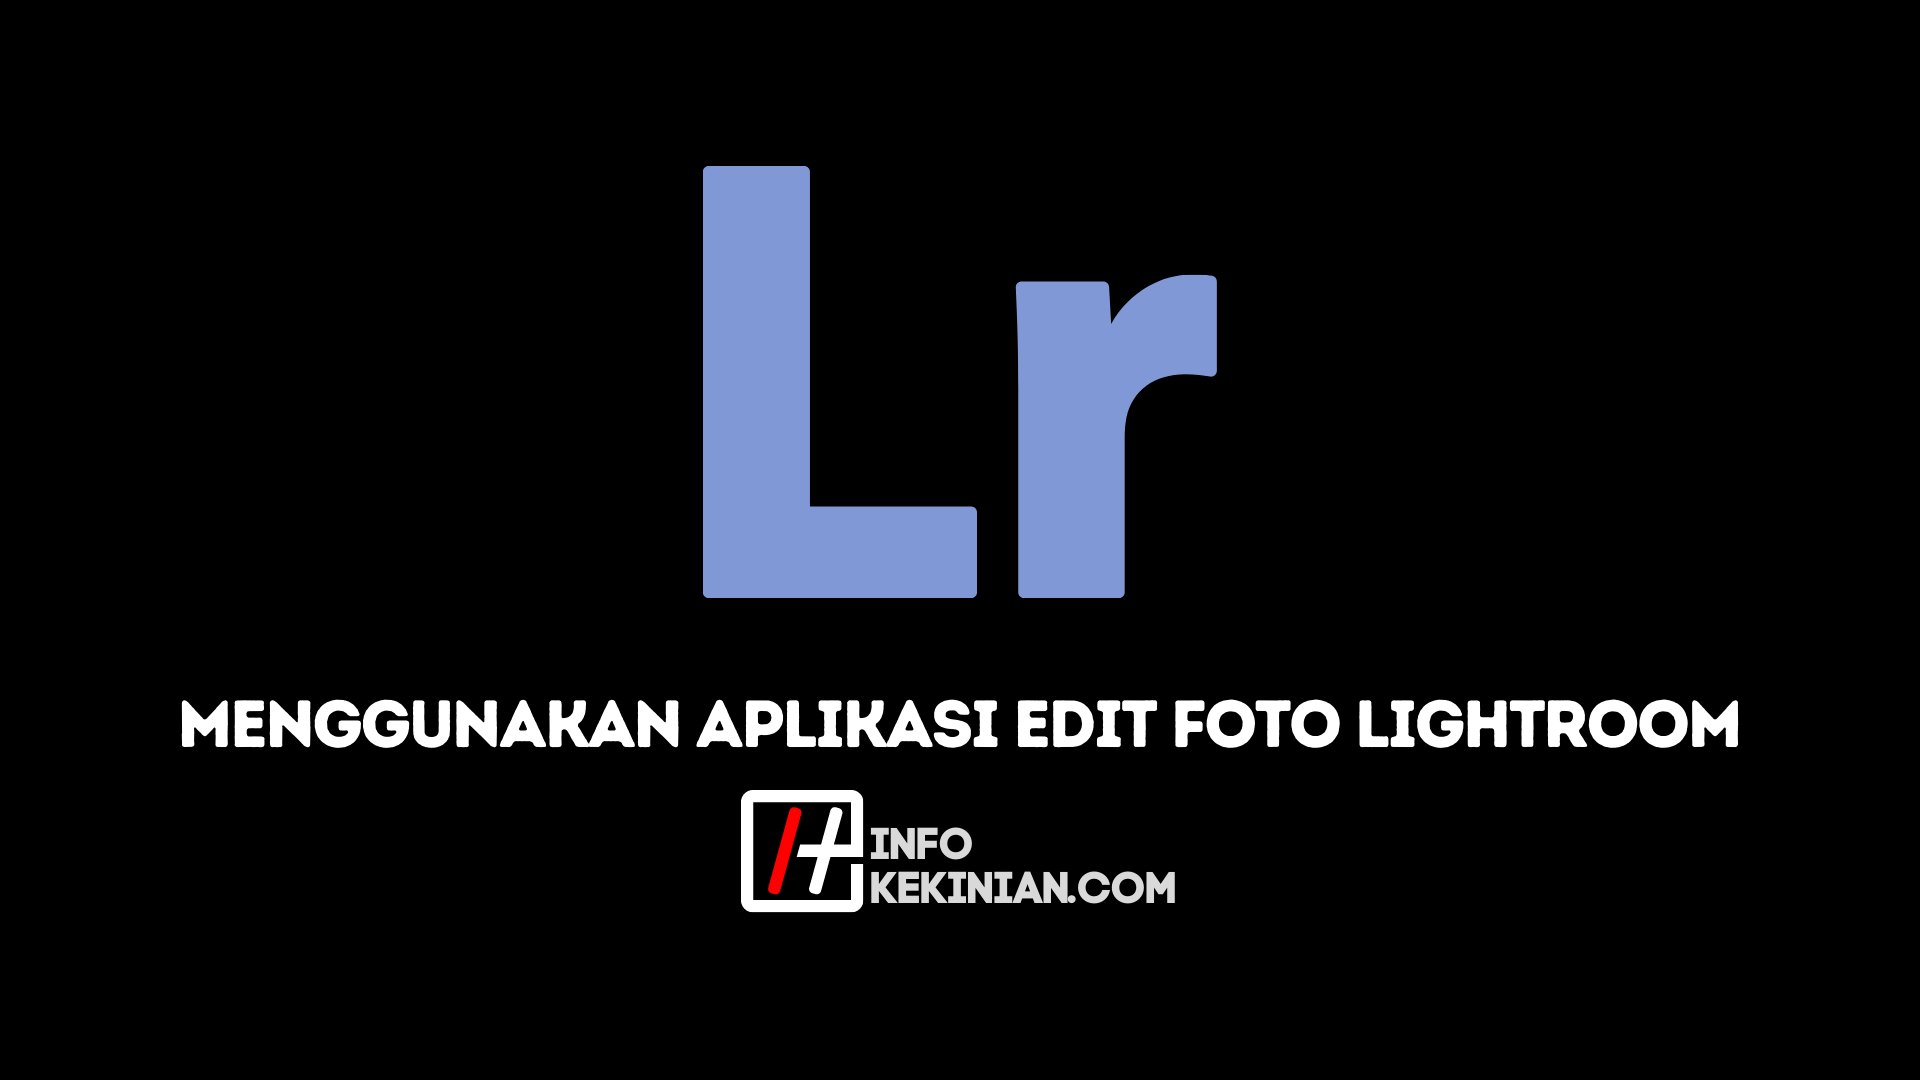 How to use the Lightroom app